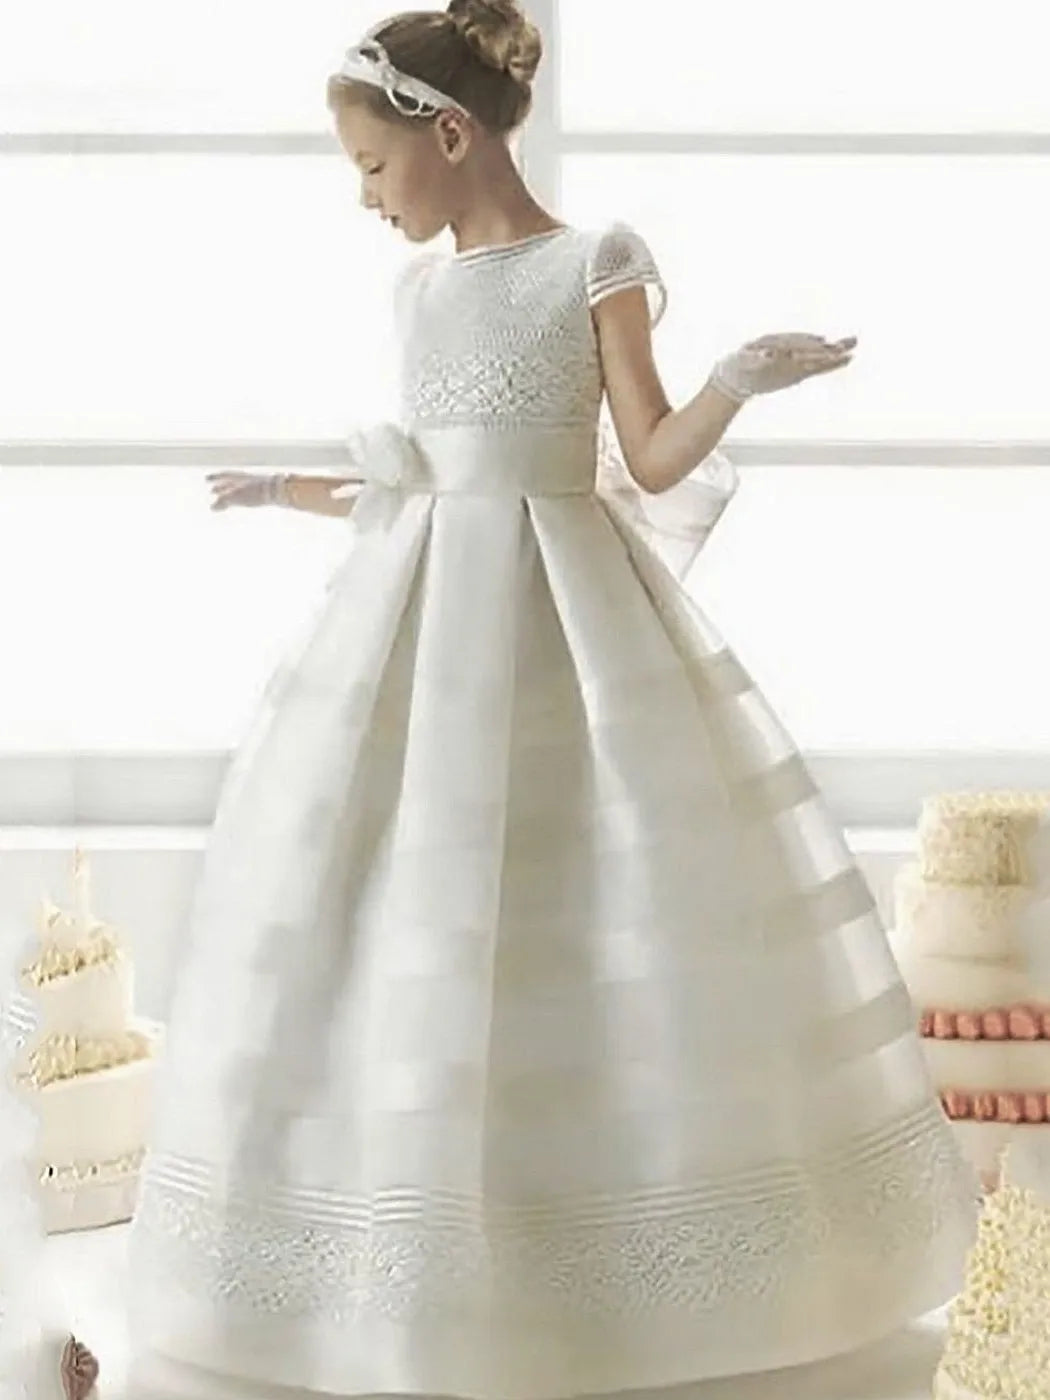 Butterfly Belt Tiered Tulle Princess Party Dress